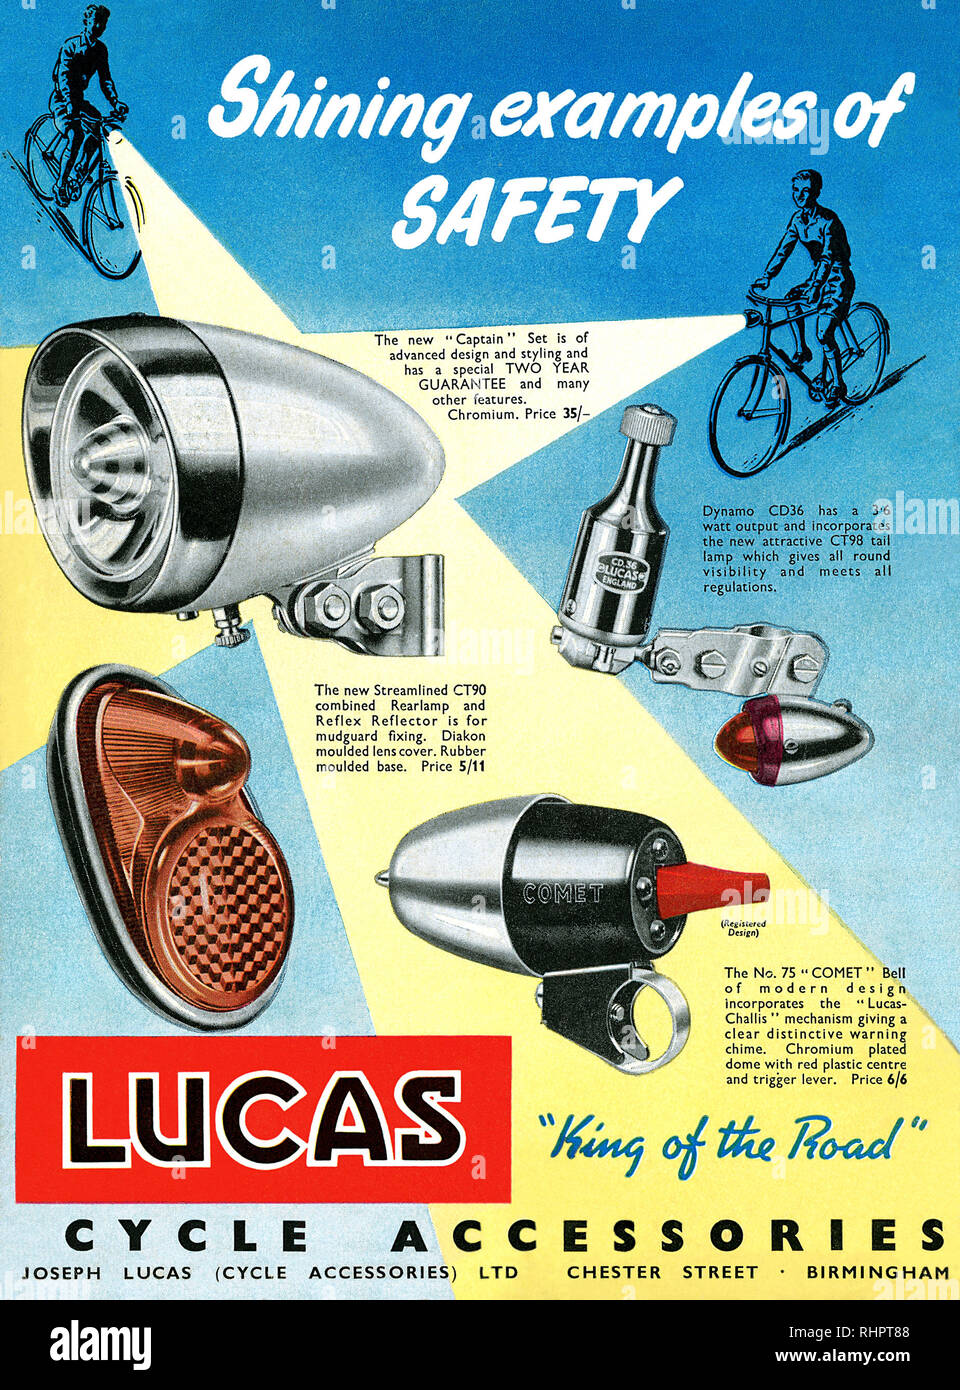 1956 British advertisement for Lucas bicycle lamps Stock Photo - Alamy